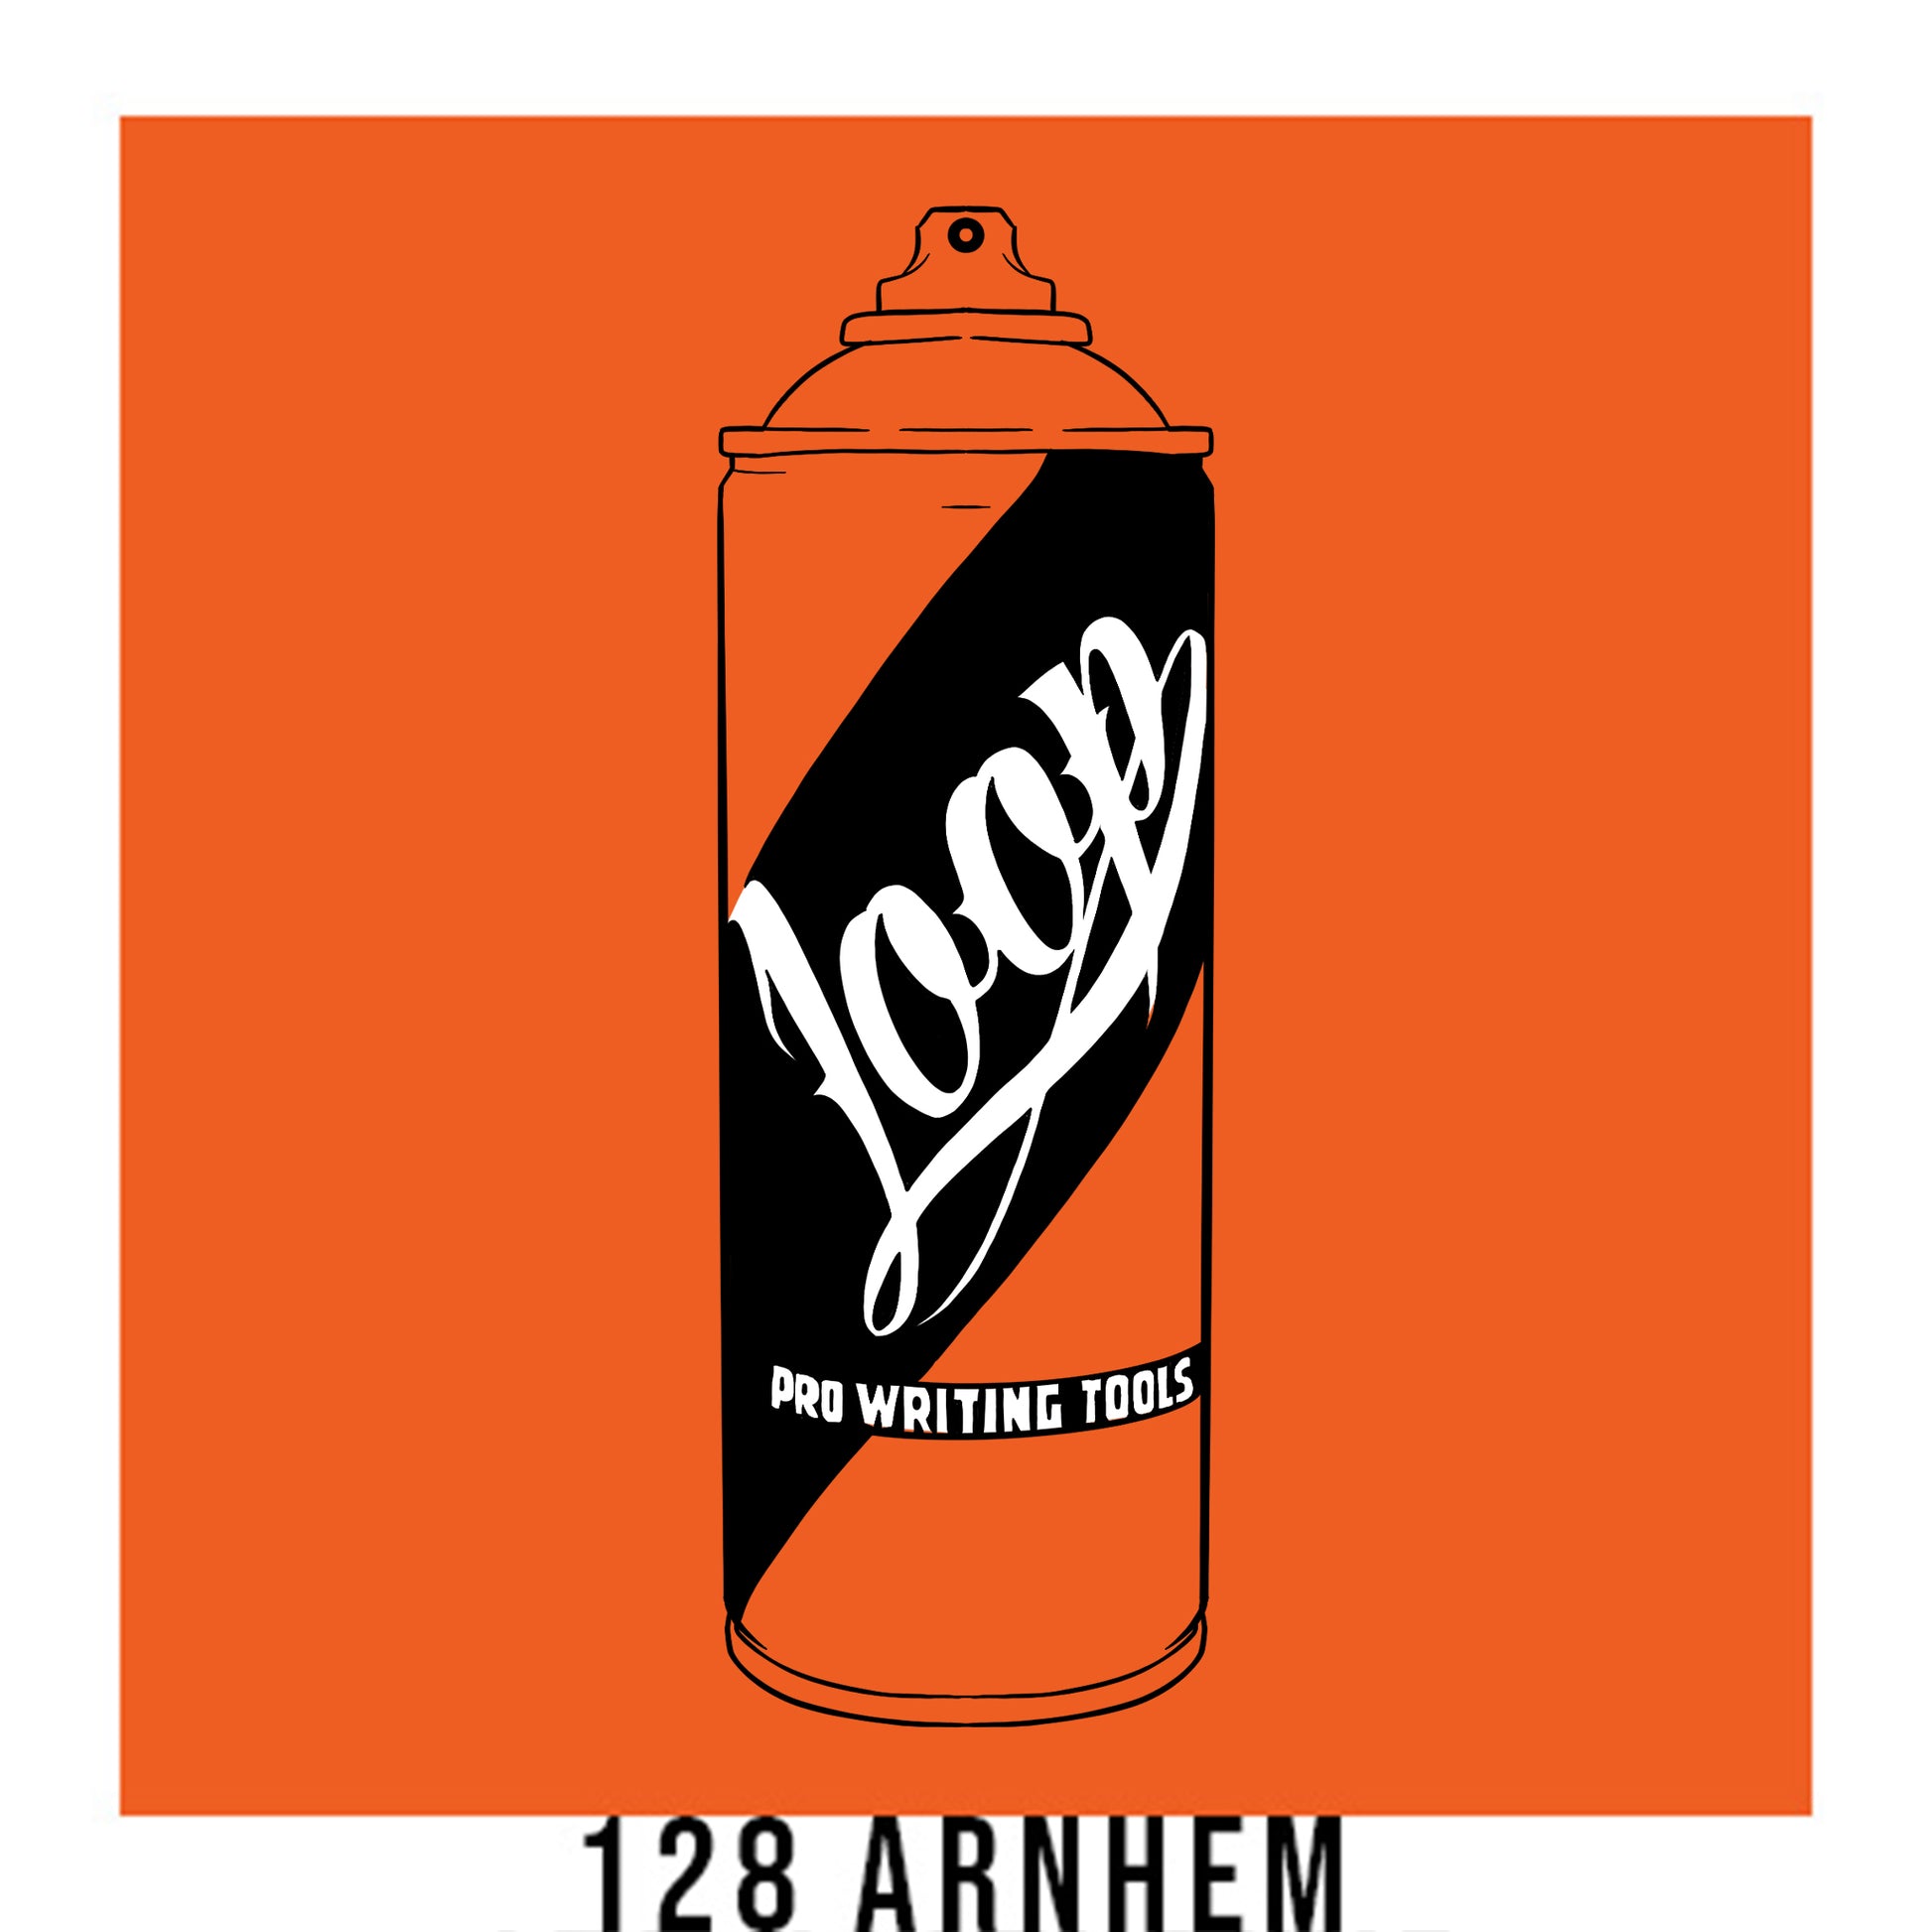 A black outline drawing of a dark orange spray paint can with the word "Loop" written on the face in script. The background is a color swatch of the same dark orange with a white border with the words "128 arnhem" at the bottom.